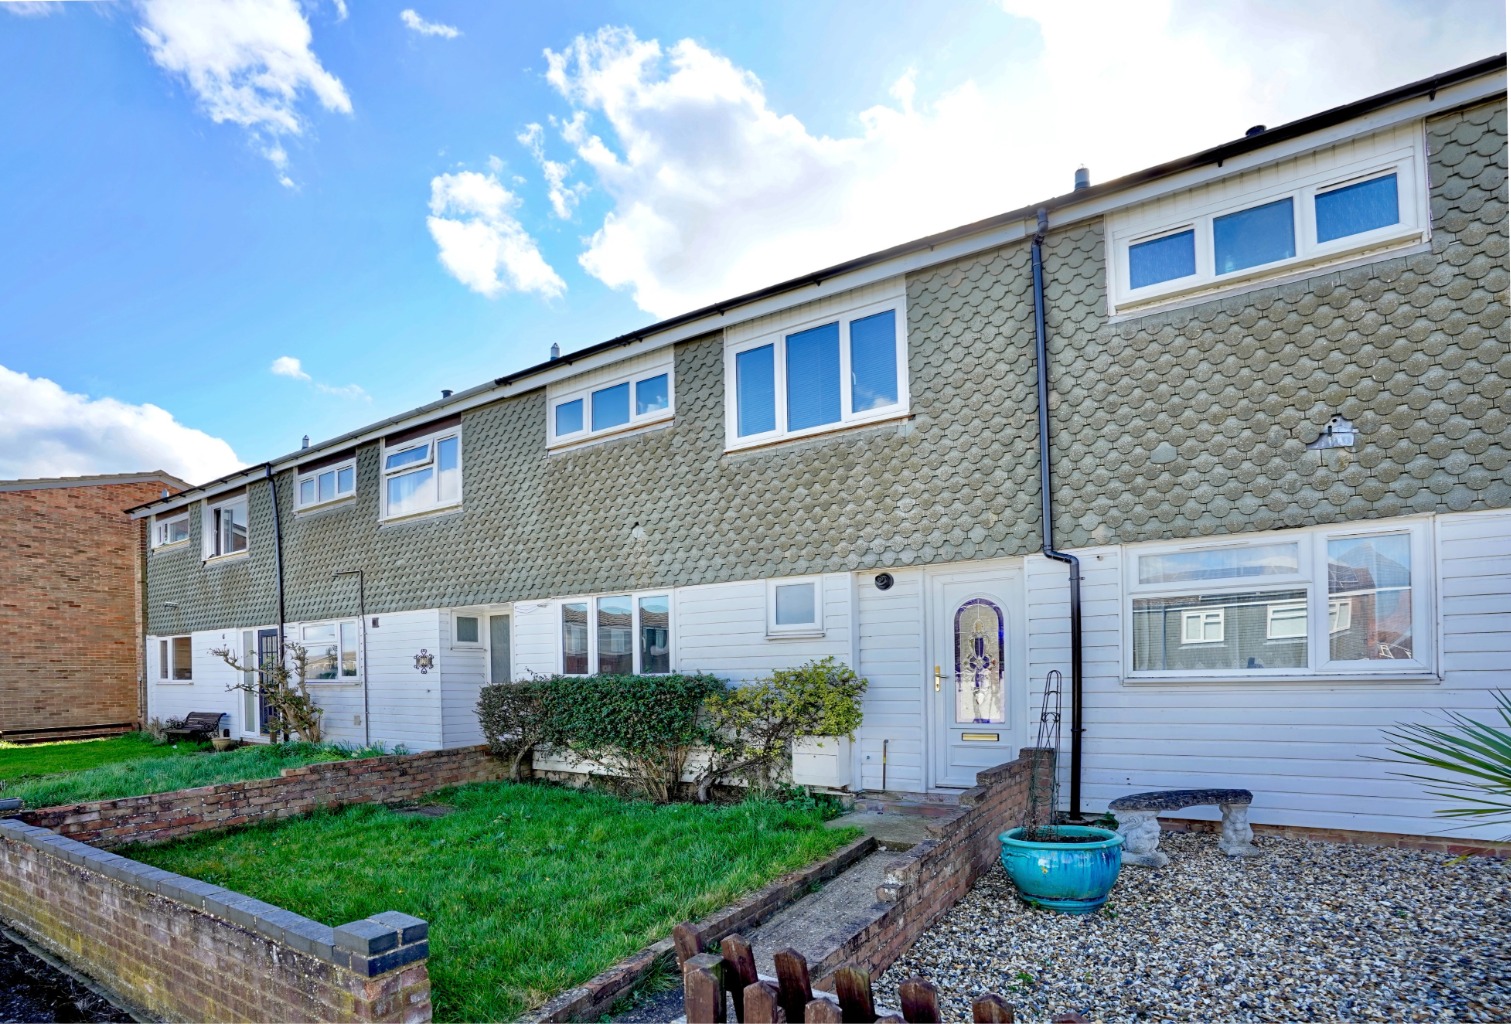 **Spacious three bedroom home* modern and spacious kitchen/diner and living space* Three good size bedrooms* single garage* Close to local amenities* Contact us to arrange your vieiwng